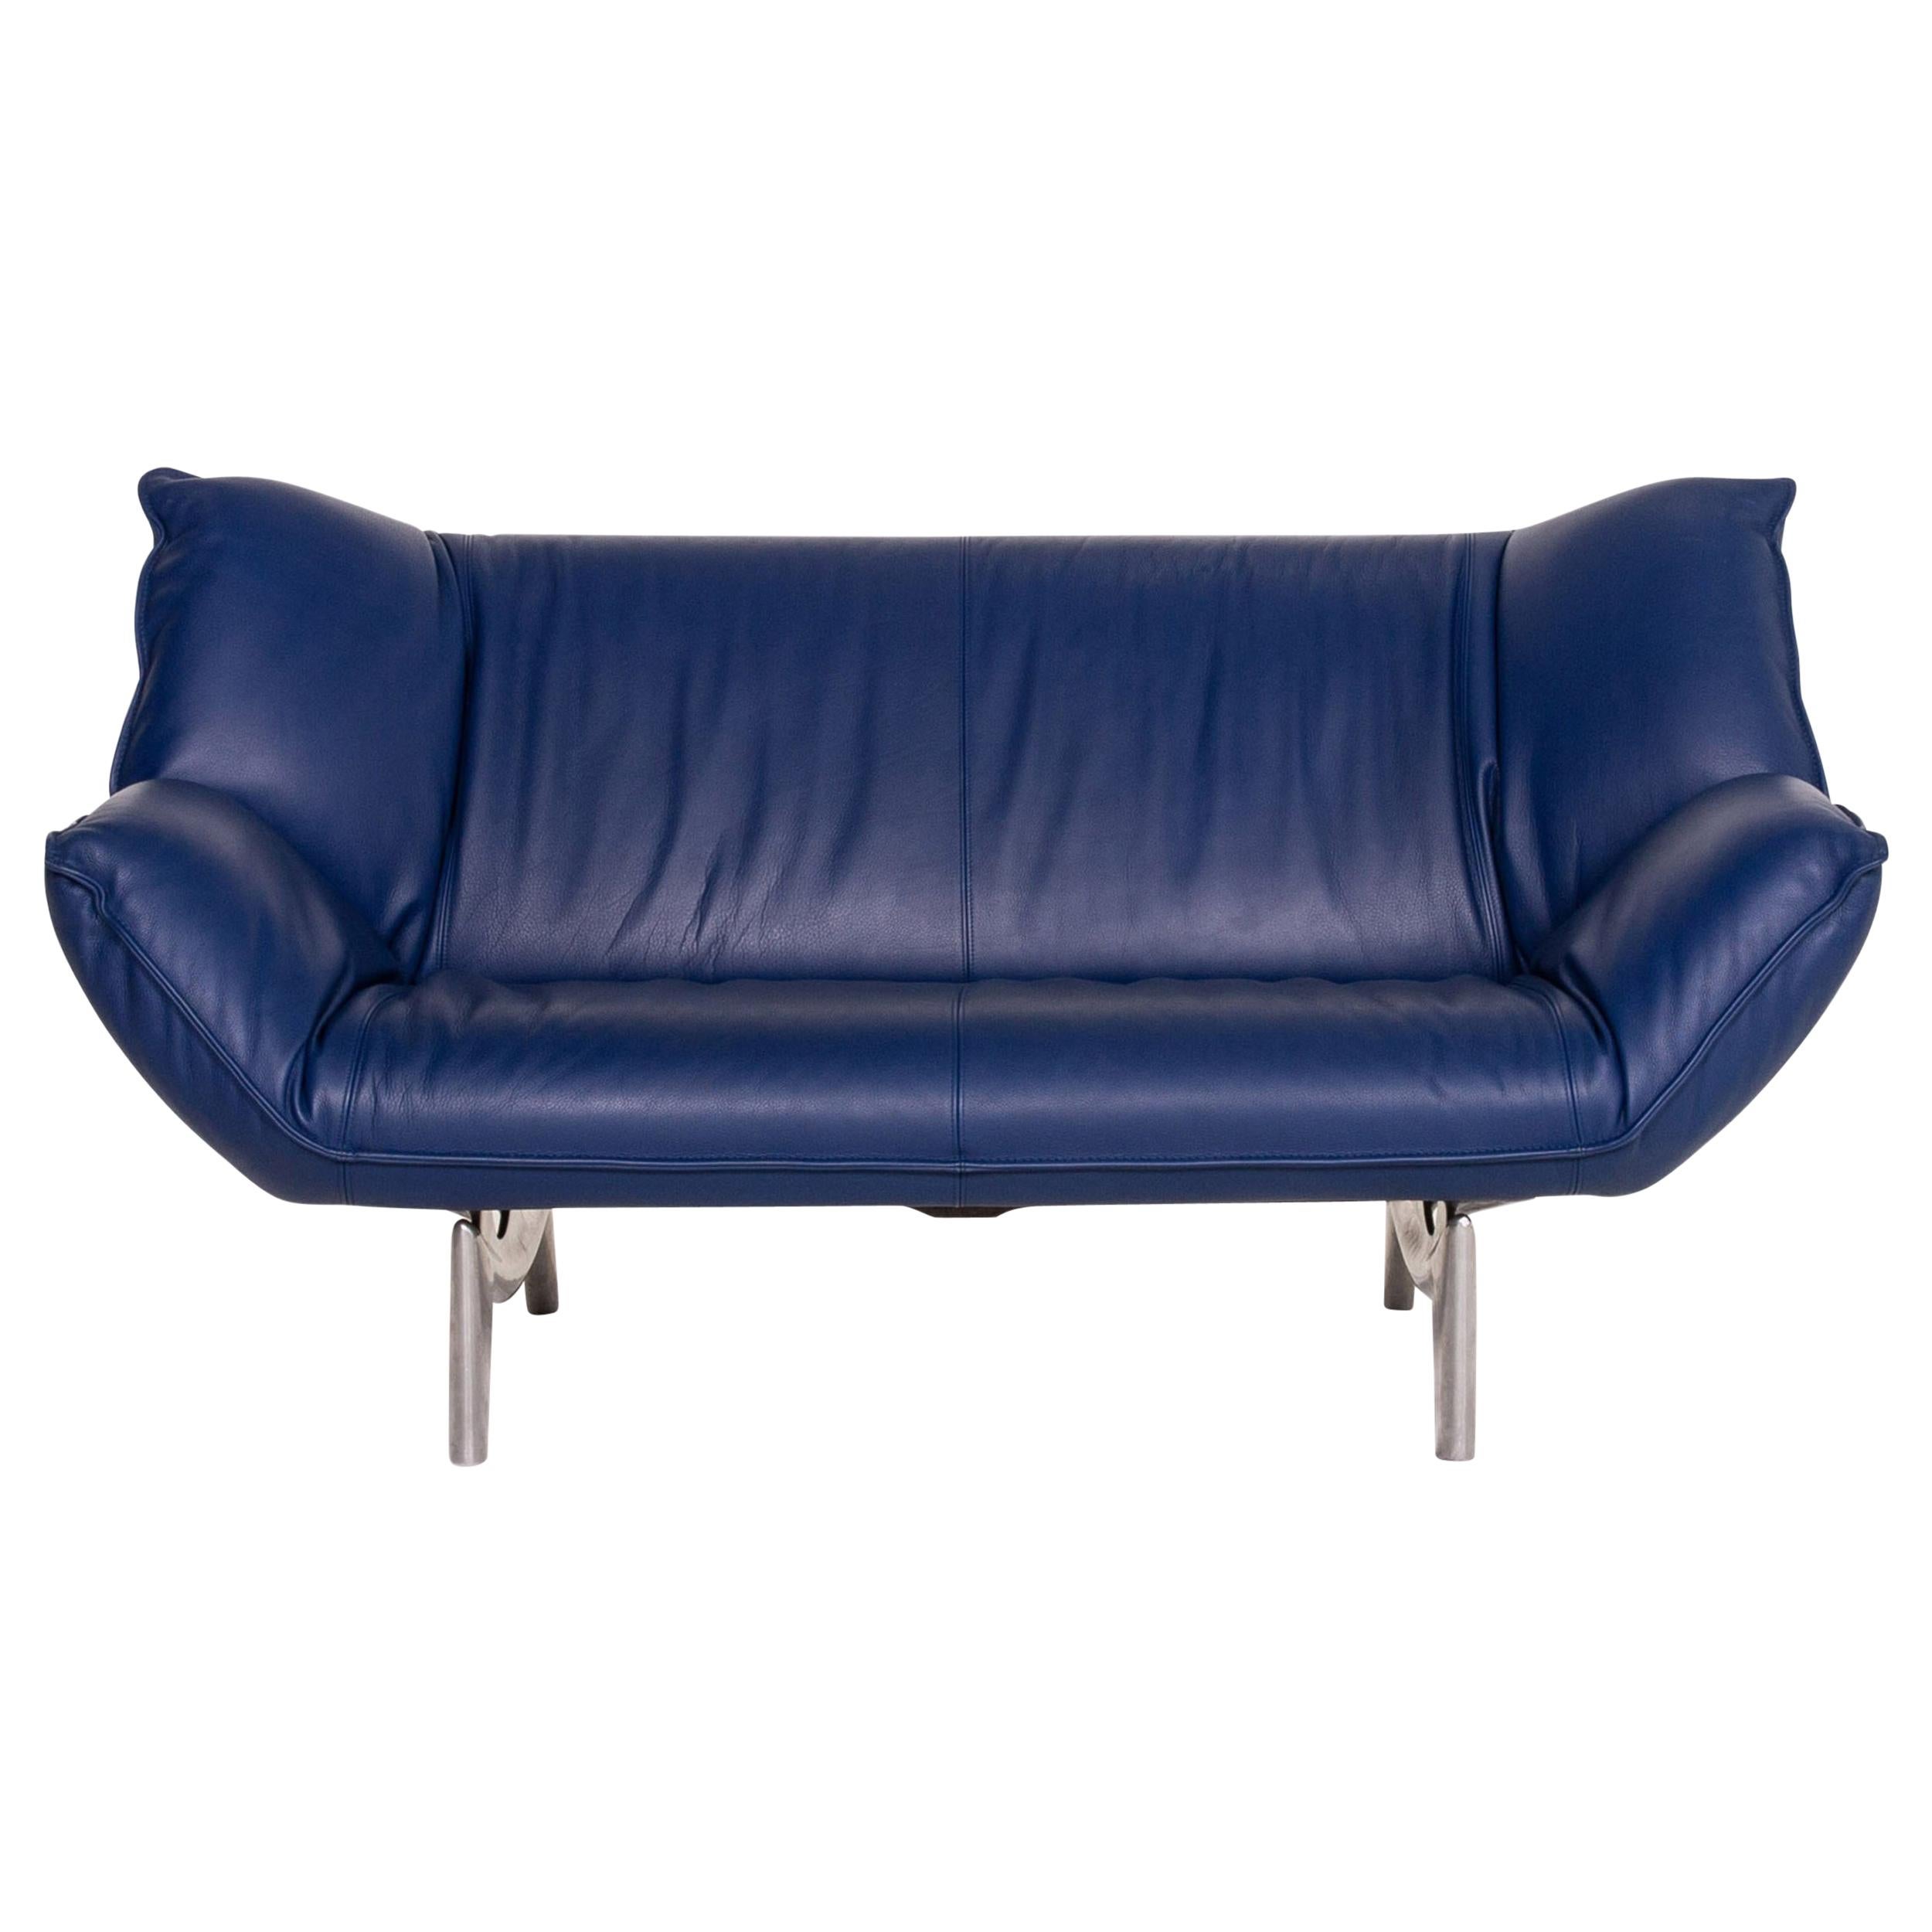 Leolux Tango Leather Sofa Blue Dark Blue Two-Seat Function Couch For Sale